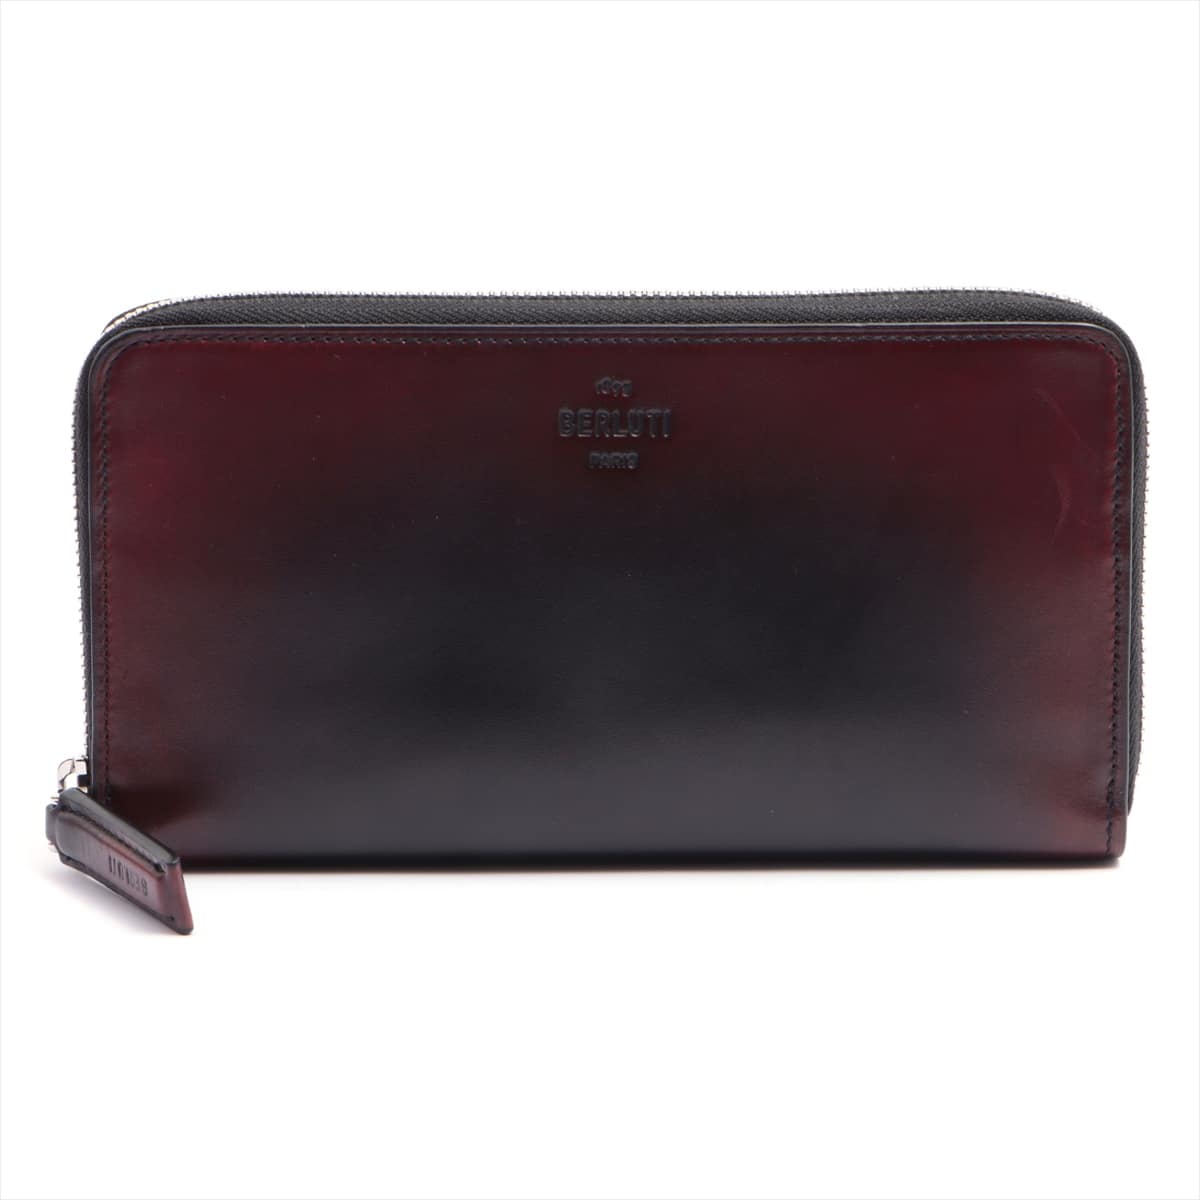 Berluti Round-Zip-Wallet Red x Black There are scratches on the outer surface